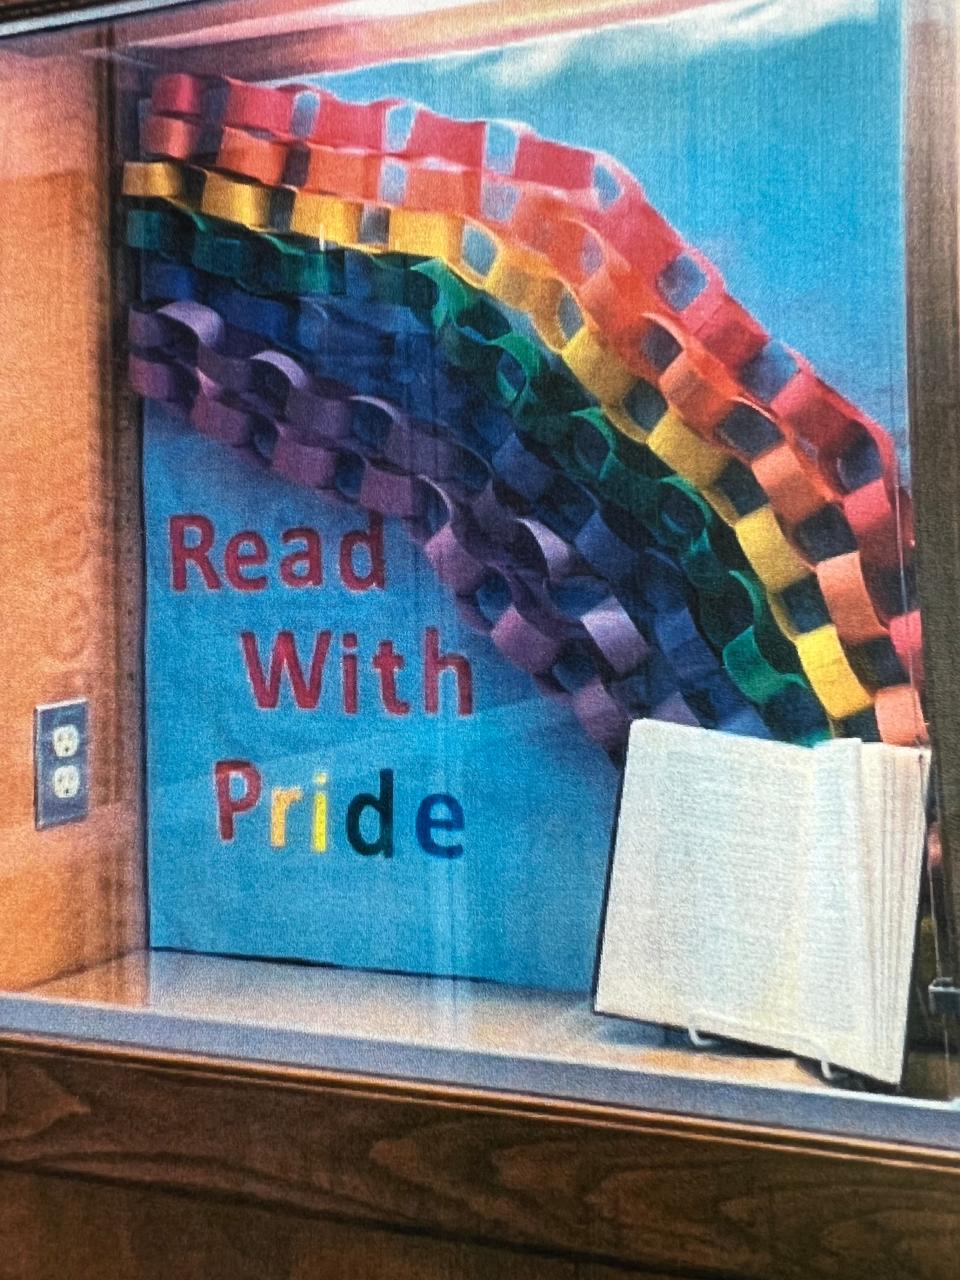 A photo of the June 2022 Pride Month display at the Travelers Rest library branch that was taken by a library patron and emailed to the board of trustees on June 16, 2022. The patron was upset by the display for "promoting one controversial ideology."